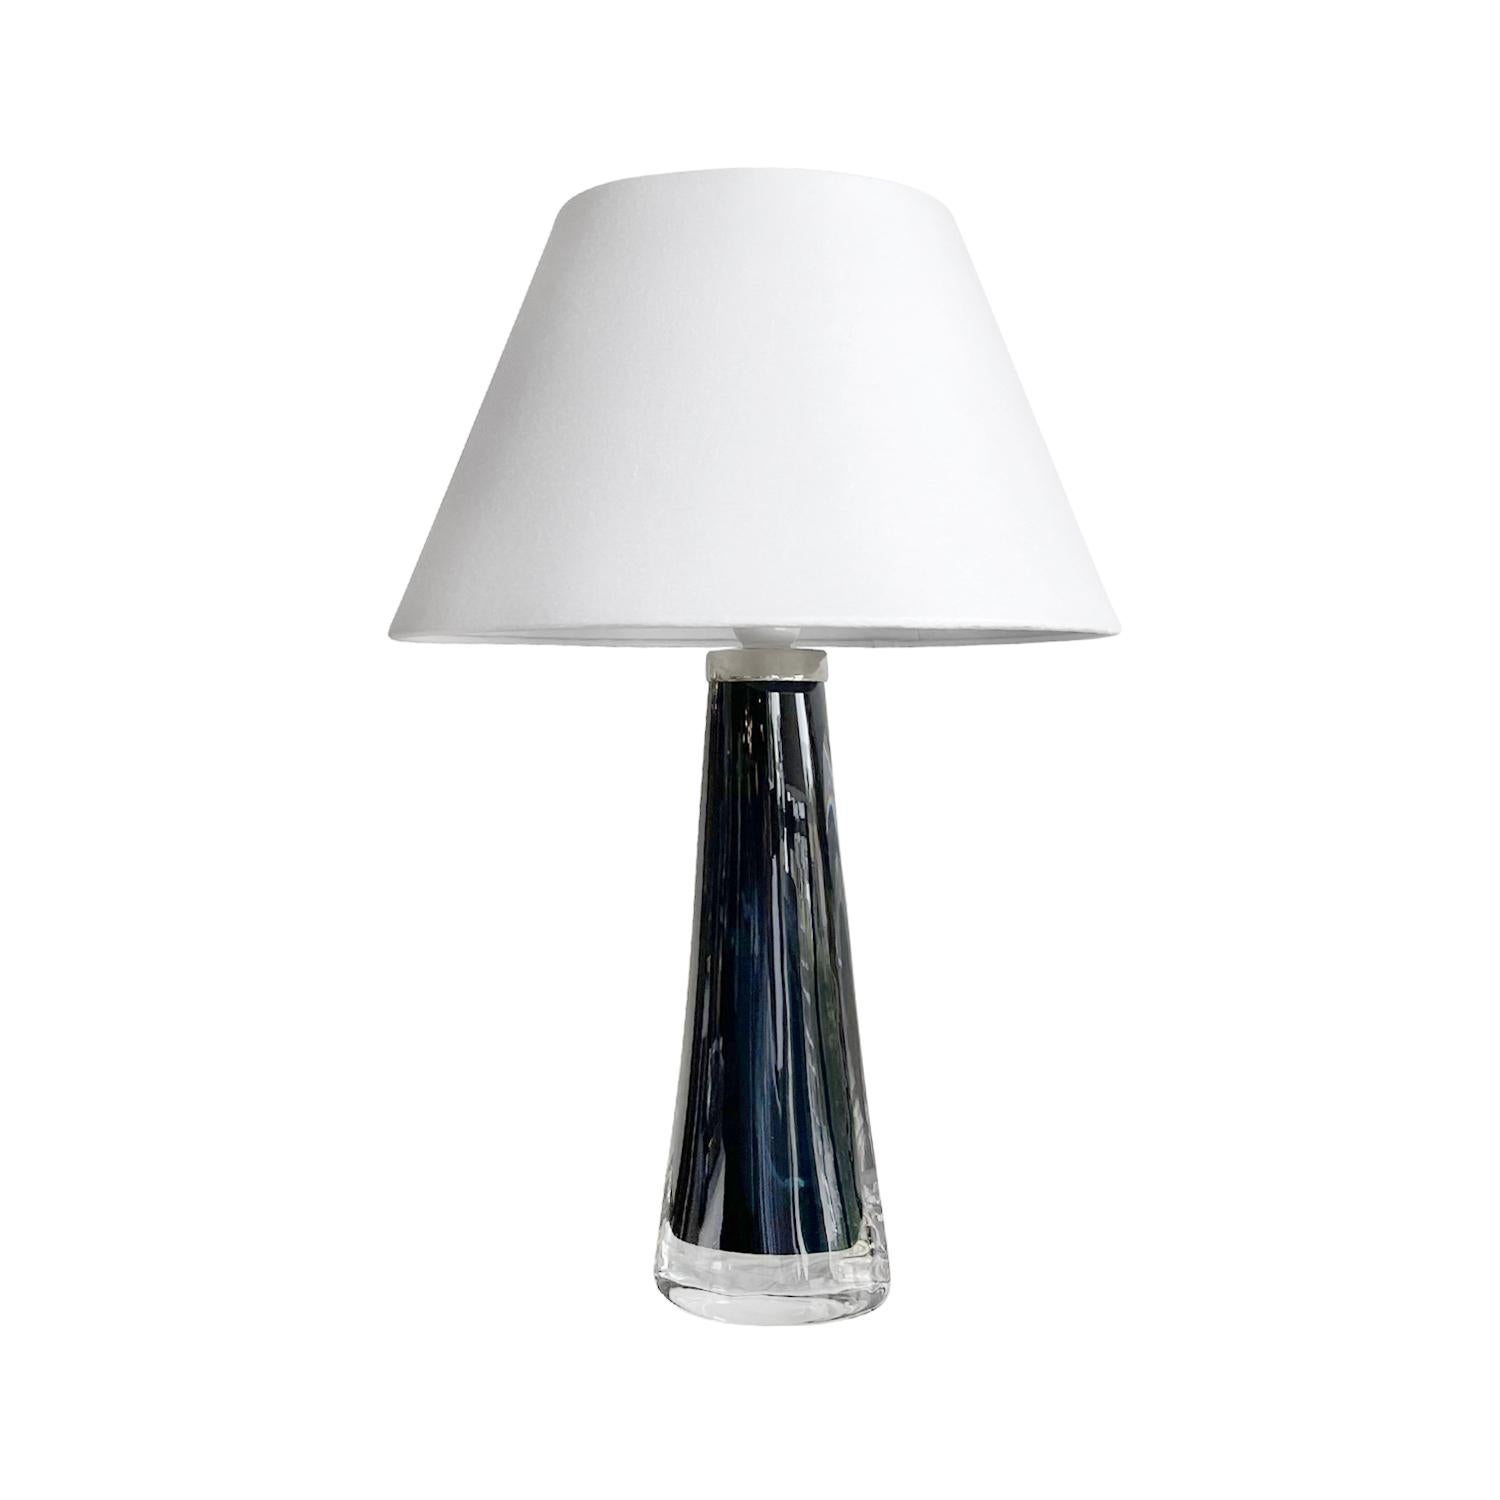 A dark-blue, black vintage Mid-Century Modern Swedish pair of table lamps with a new white round shade made of hand blown smoked Orrefors glass, designed by Carl Fagerlund and produced, signed by Orrefors in good condition. The Scandinavian desk